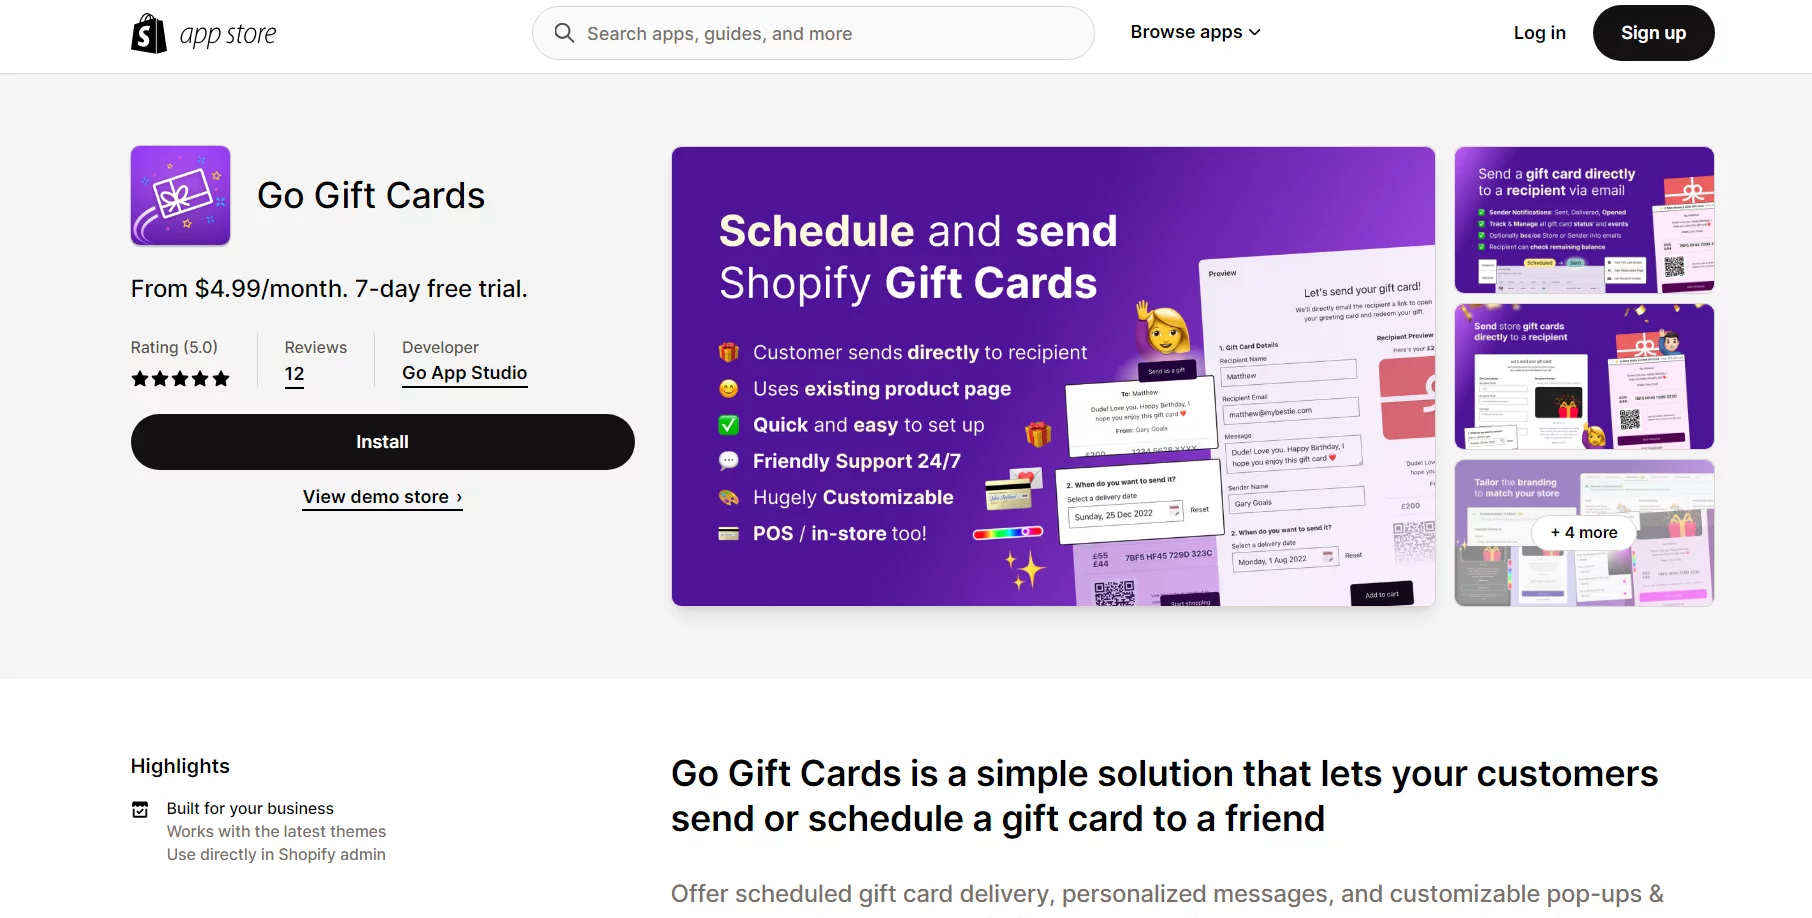 Go Gift Cards